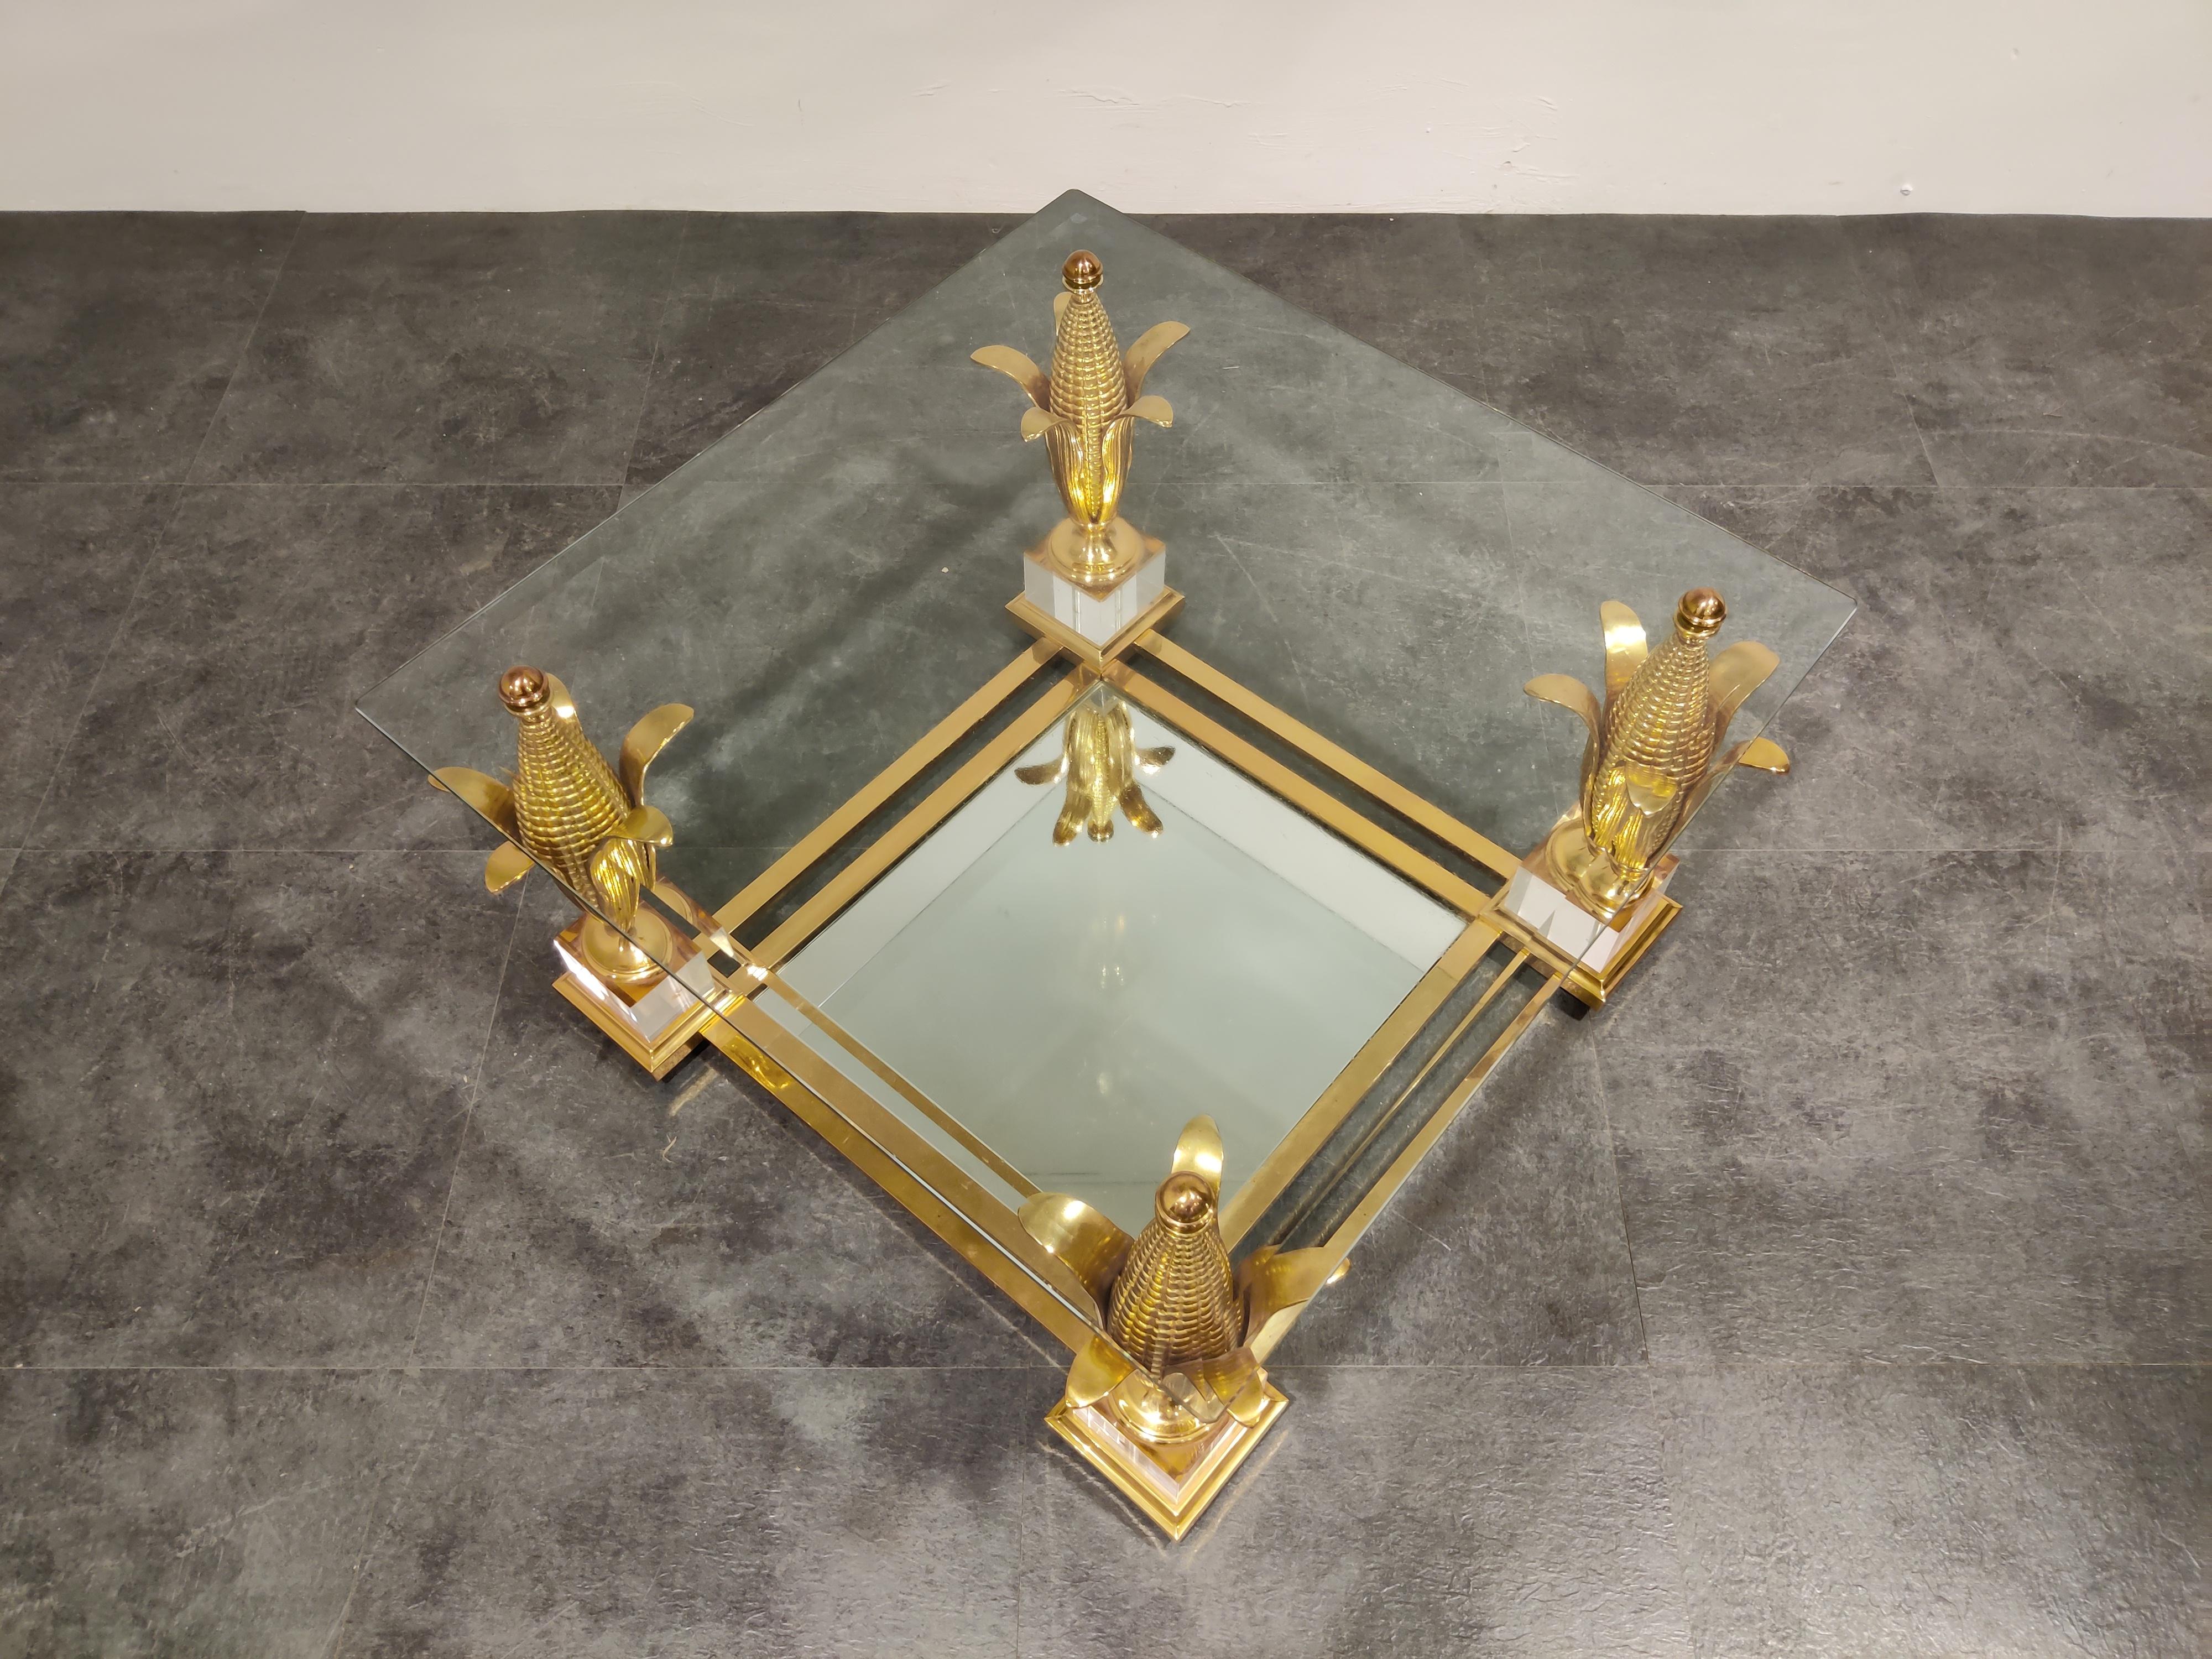 Stunning Hollywood Regency coffee- or side table with a clear beveled glass top and a mirrored glass at the bottom.

If features a brass and Lucite base with brass acorn shaped columns supporting the glass.

The acorns are very